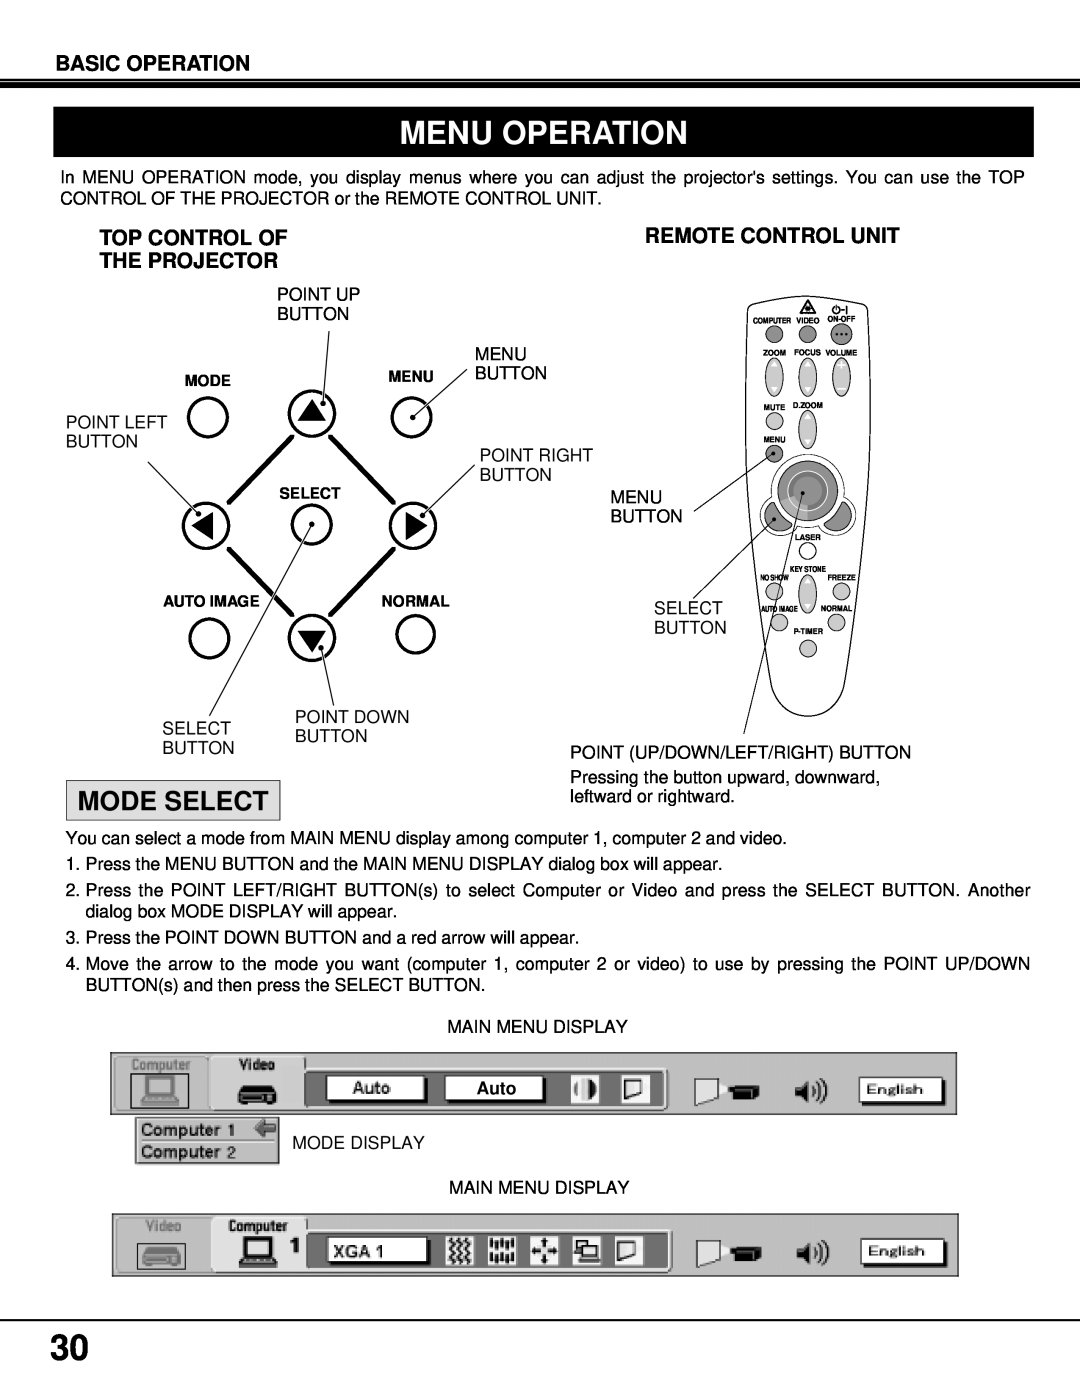 BOXLIGHT MP-37t manual Menu Operation, Mode Select, Basic Operation, Top Control Of The Projector, Remote Control Unit 